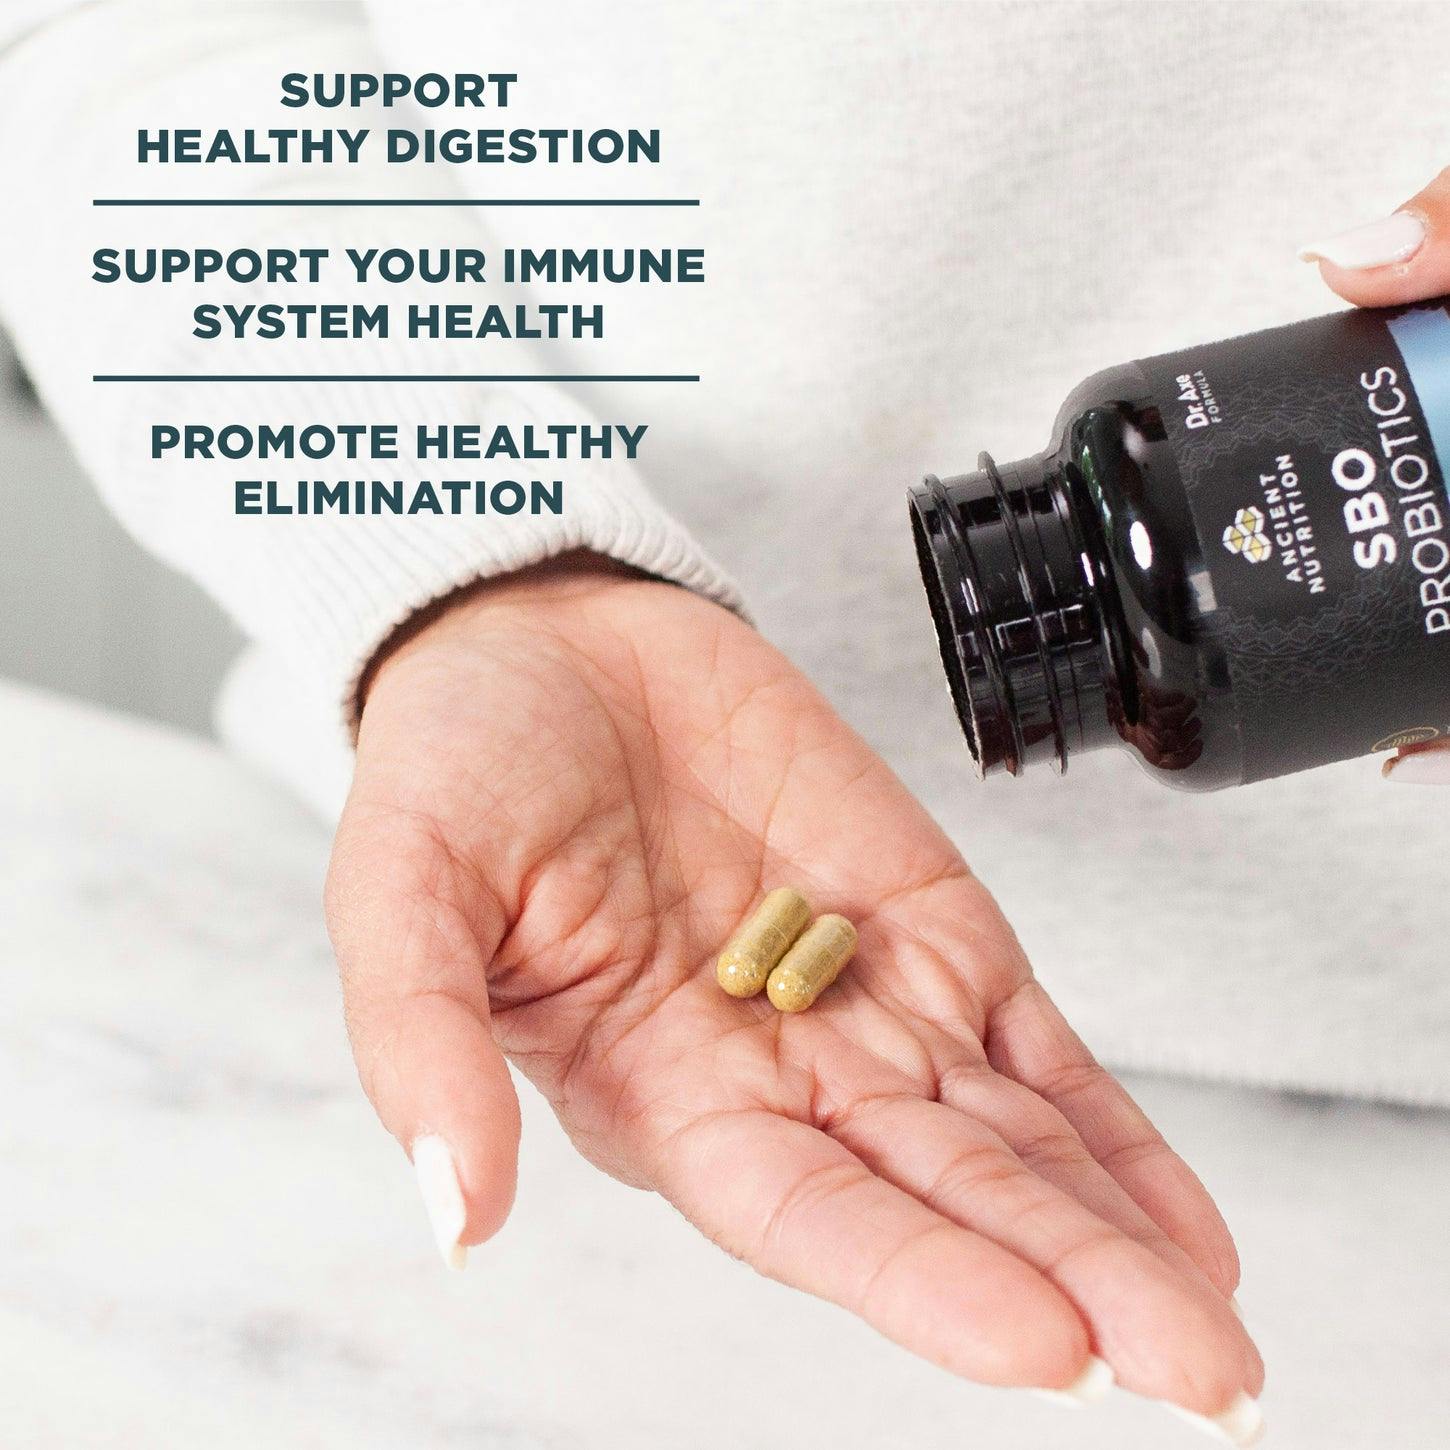 sbo probiotics ultimate in palm of hand